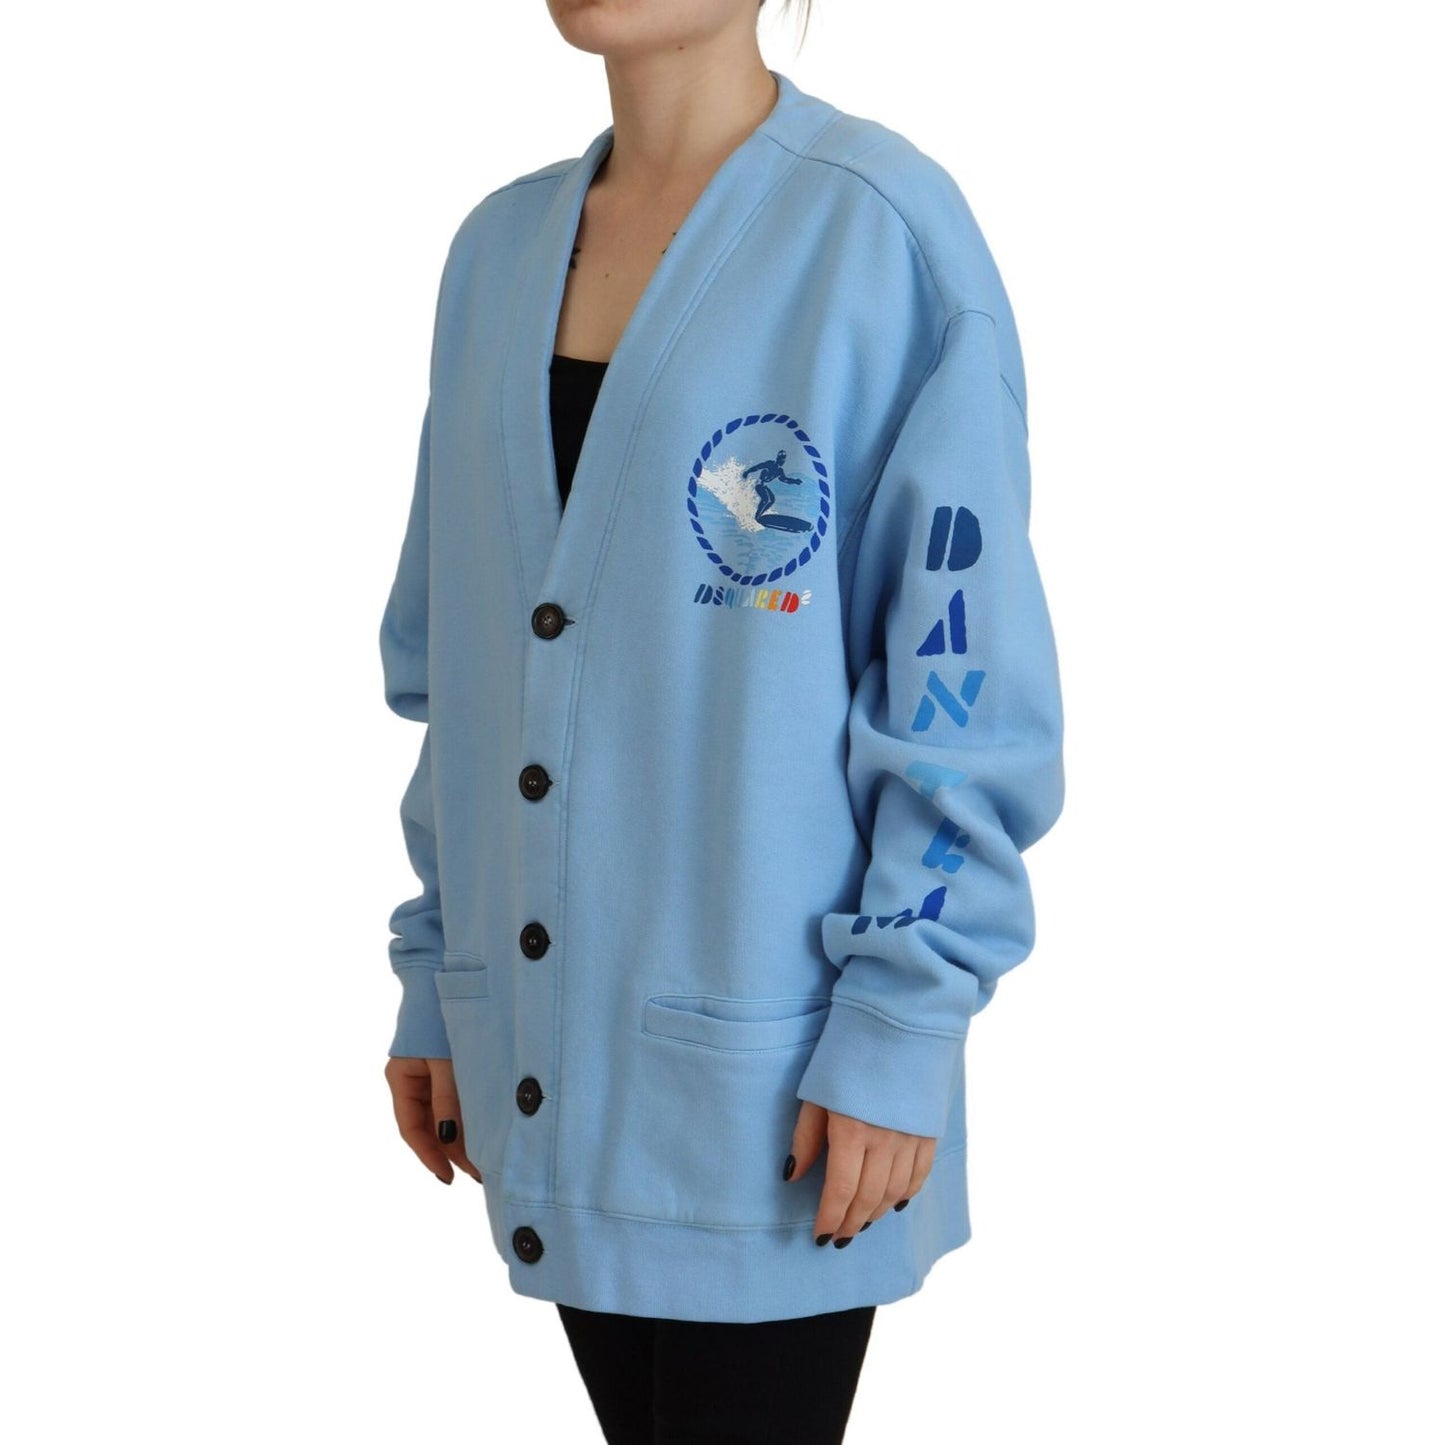 Dsquared² Blue Cotton Knitted Buttoned Cardigan Sweater blue-cotton-knitted-buttoned-cardigan-sweater